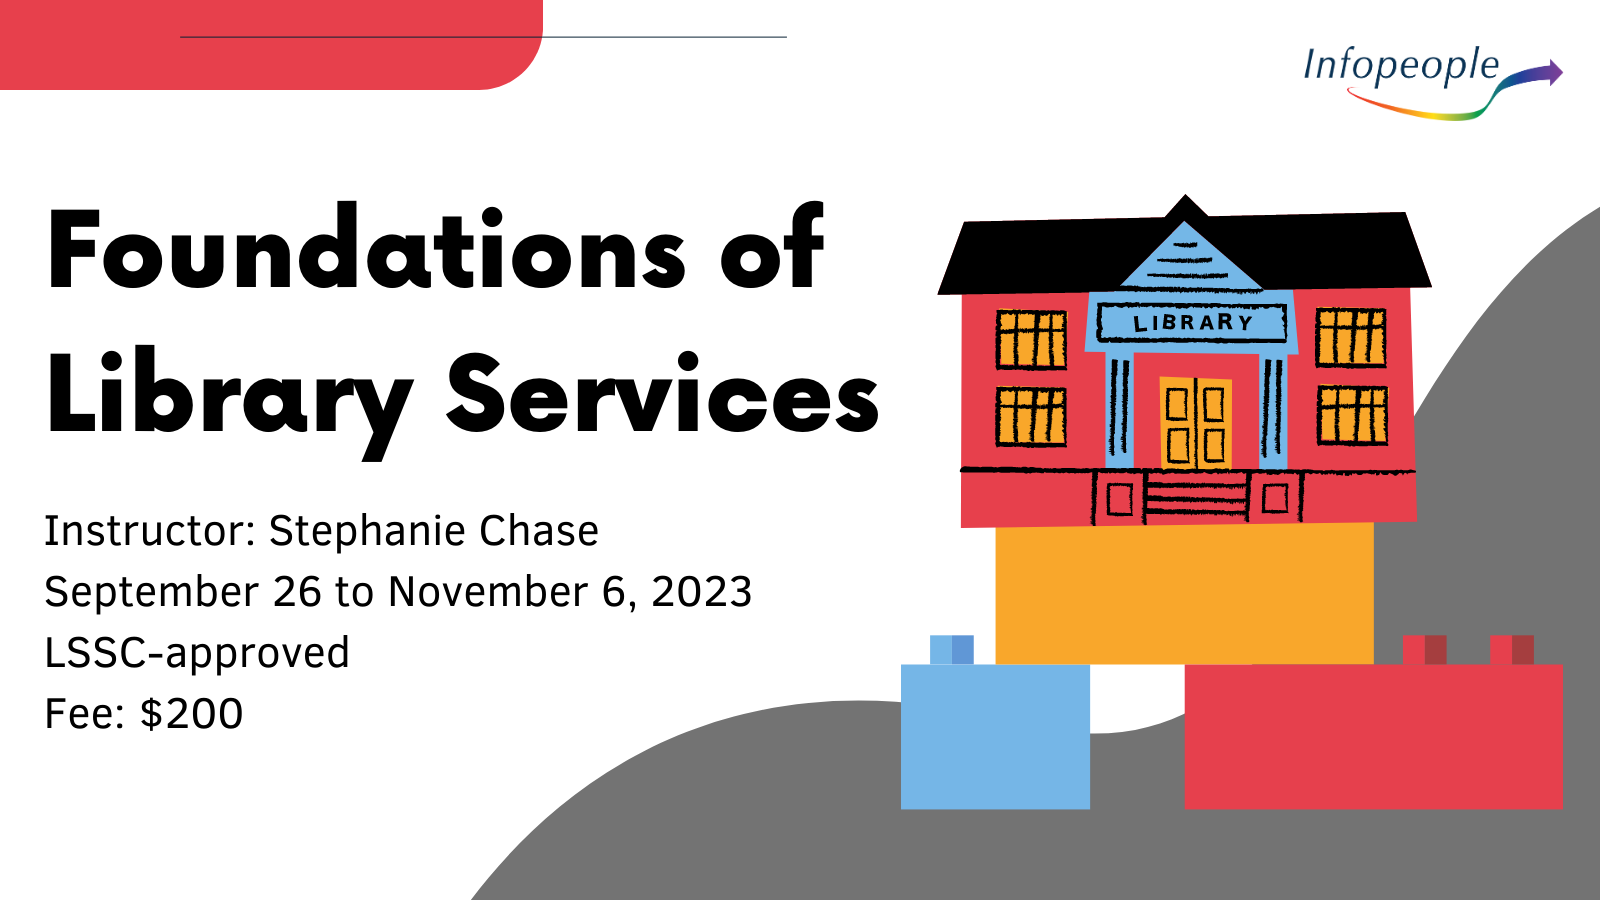 Foundations of Library Services - an Infopeople course. September 26 to November 6, 2023. LSSC-approved. Instructor: Stephanie Chase. Fee: $200. A set of Lego building blocks with a library building on top.